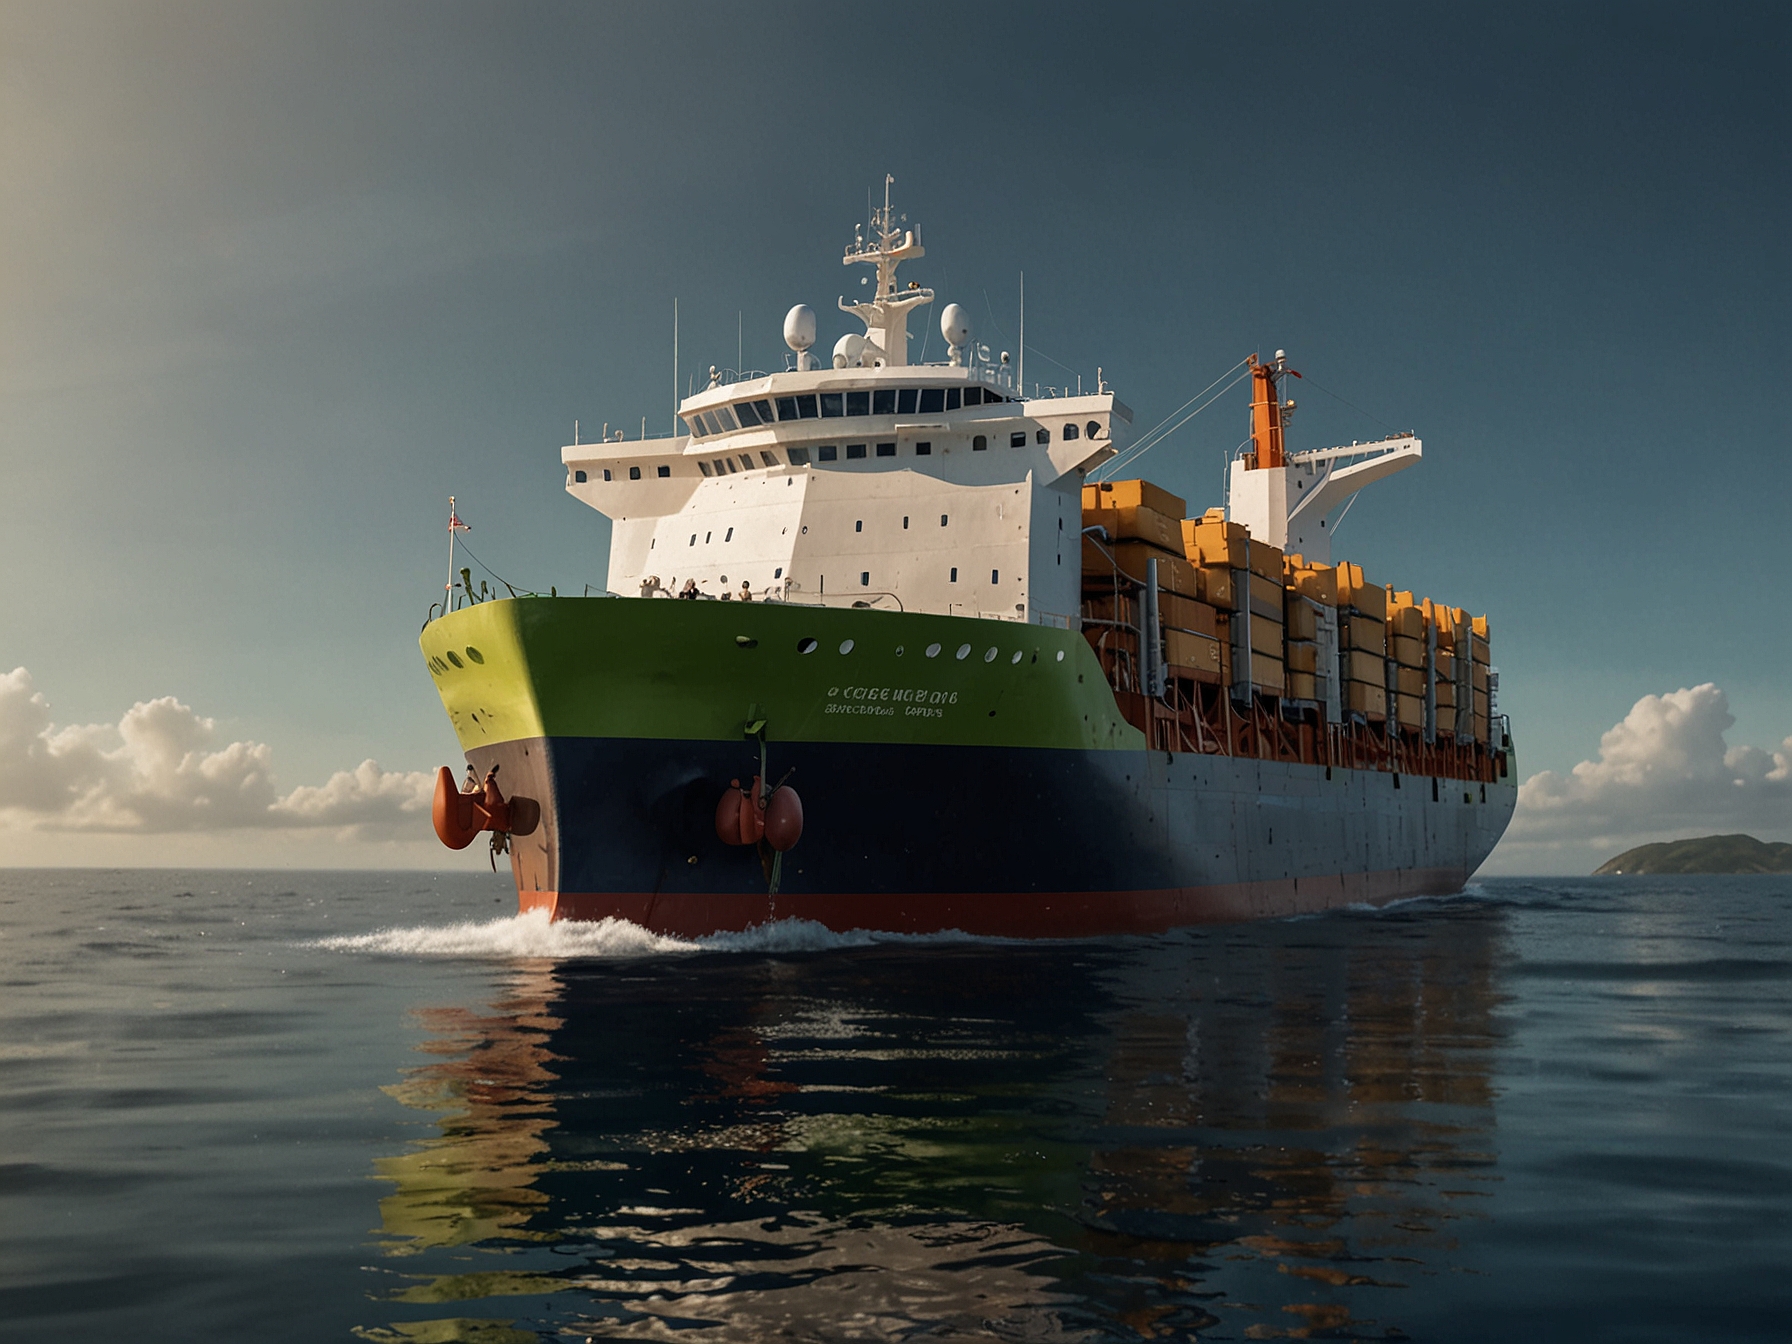 A shipping vessel using biofuel derived from cashew nut shells, representing the industry's efforts to explore sustainable energy alternatives and reduce carbon emissions.